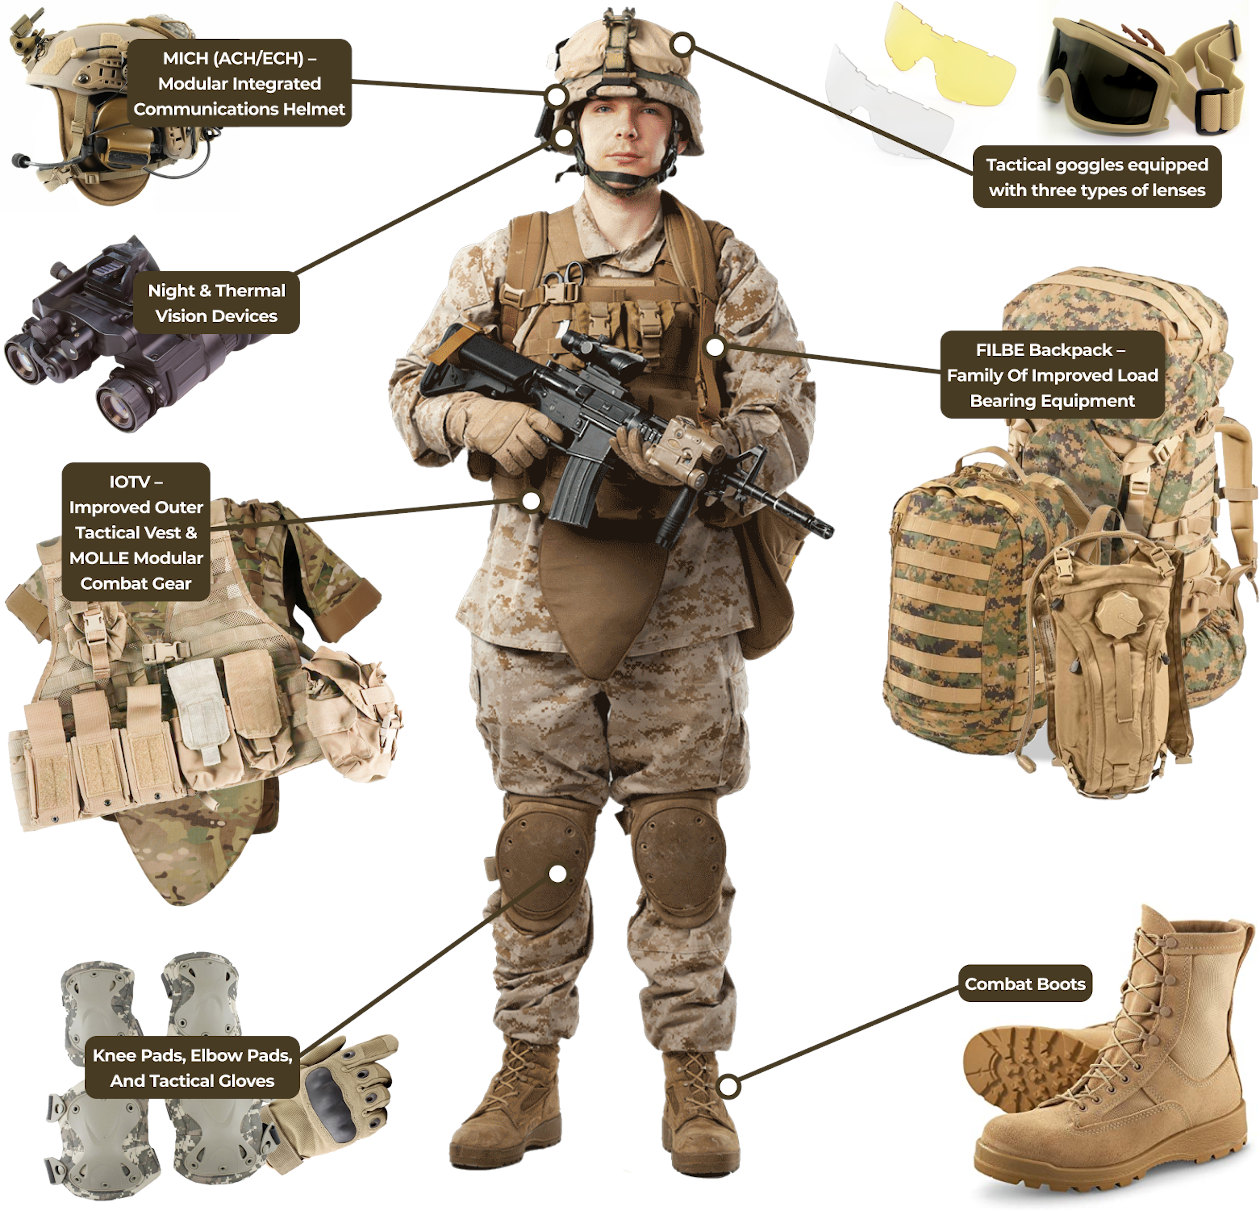 US soldier equipment. Part 3. History - AGM Global Vision